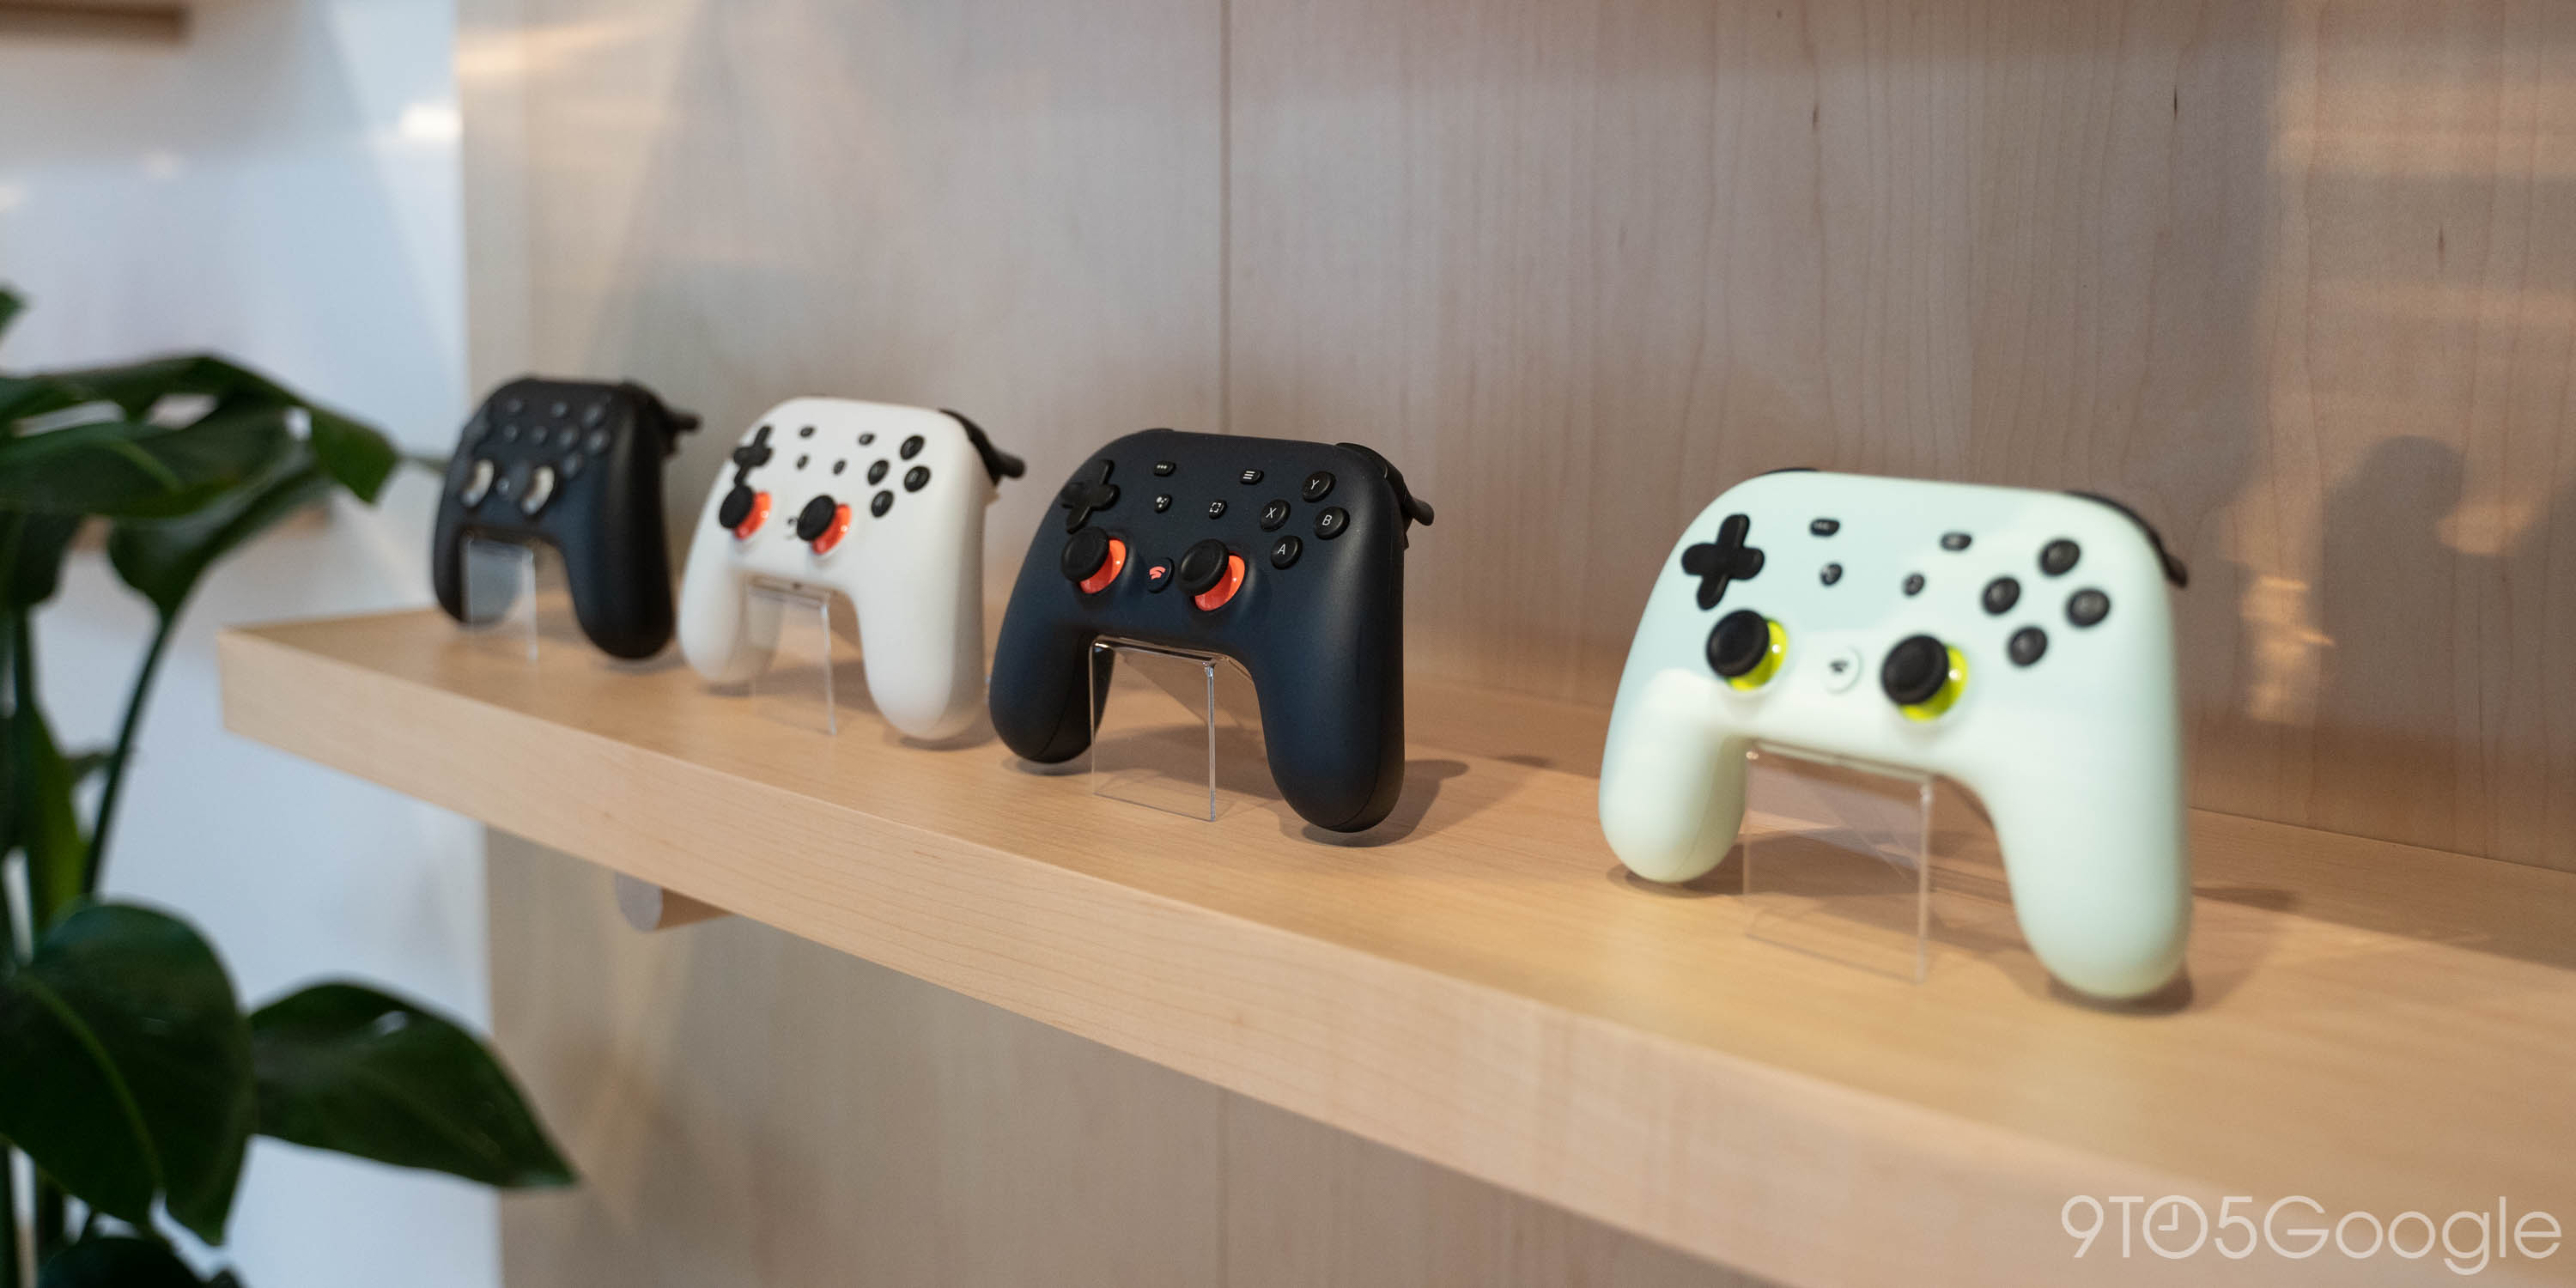 Google starts shipping Stadia Founder's Edition 9to5Google